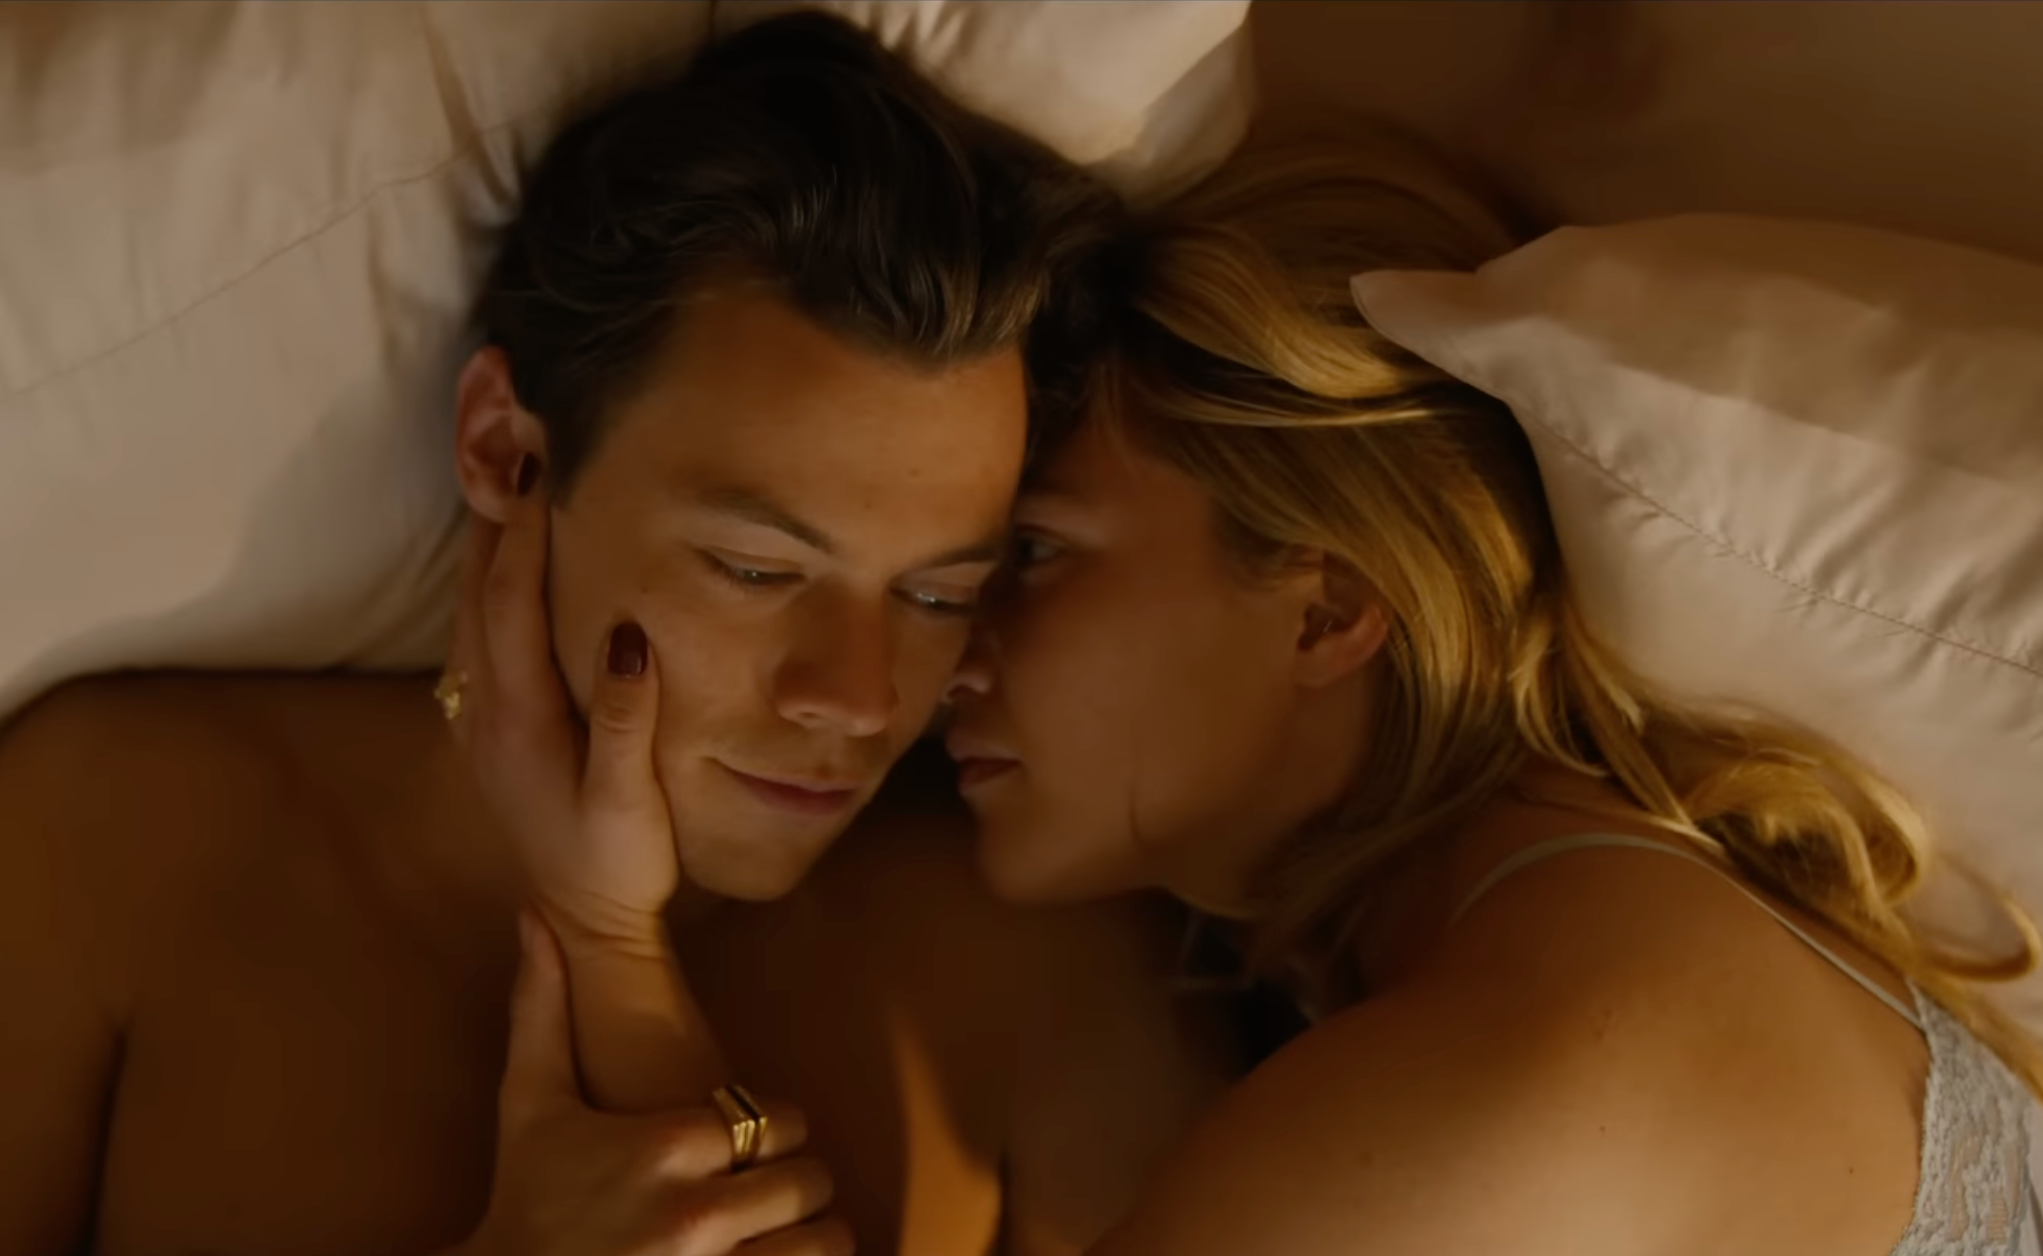 Harry Styles and Florence Pugh in new trailer for Don’t Worry Darling